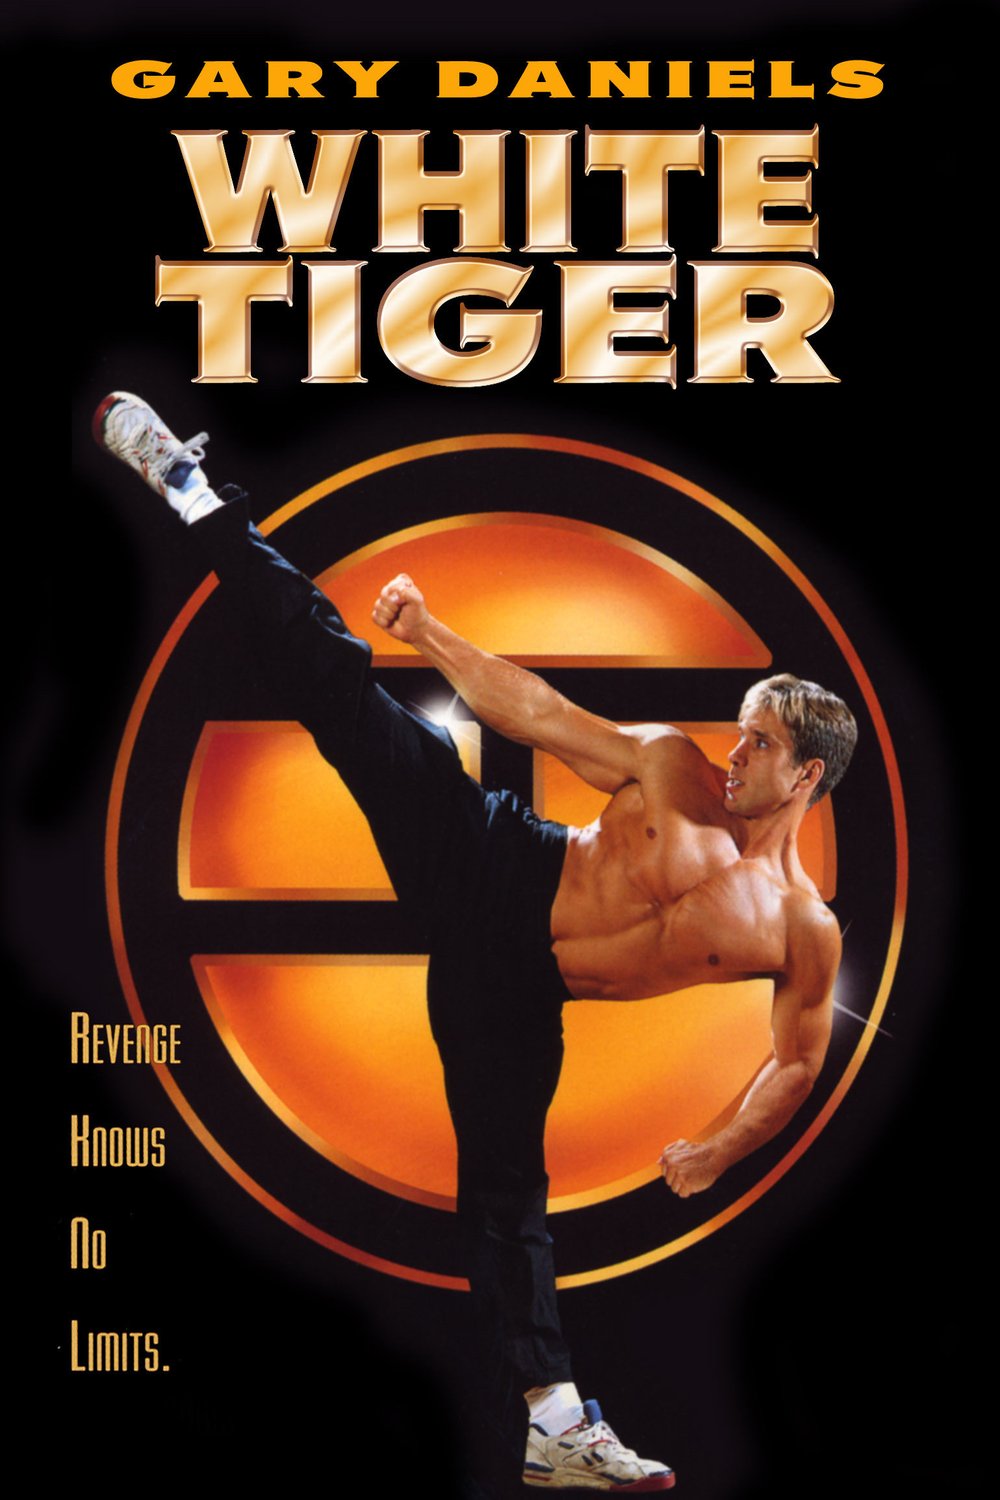 Poster of the movie White Tiger